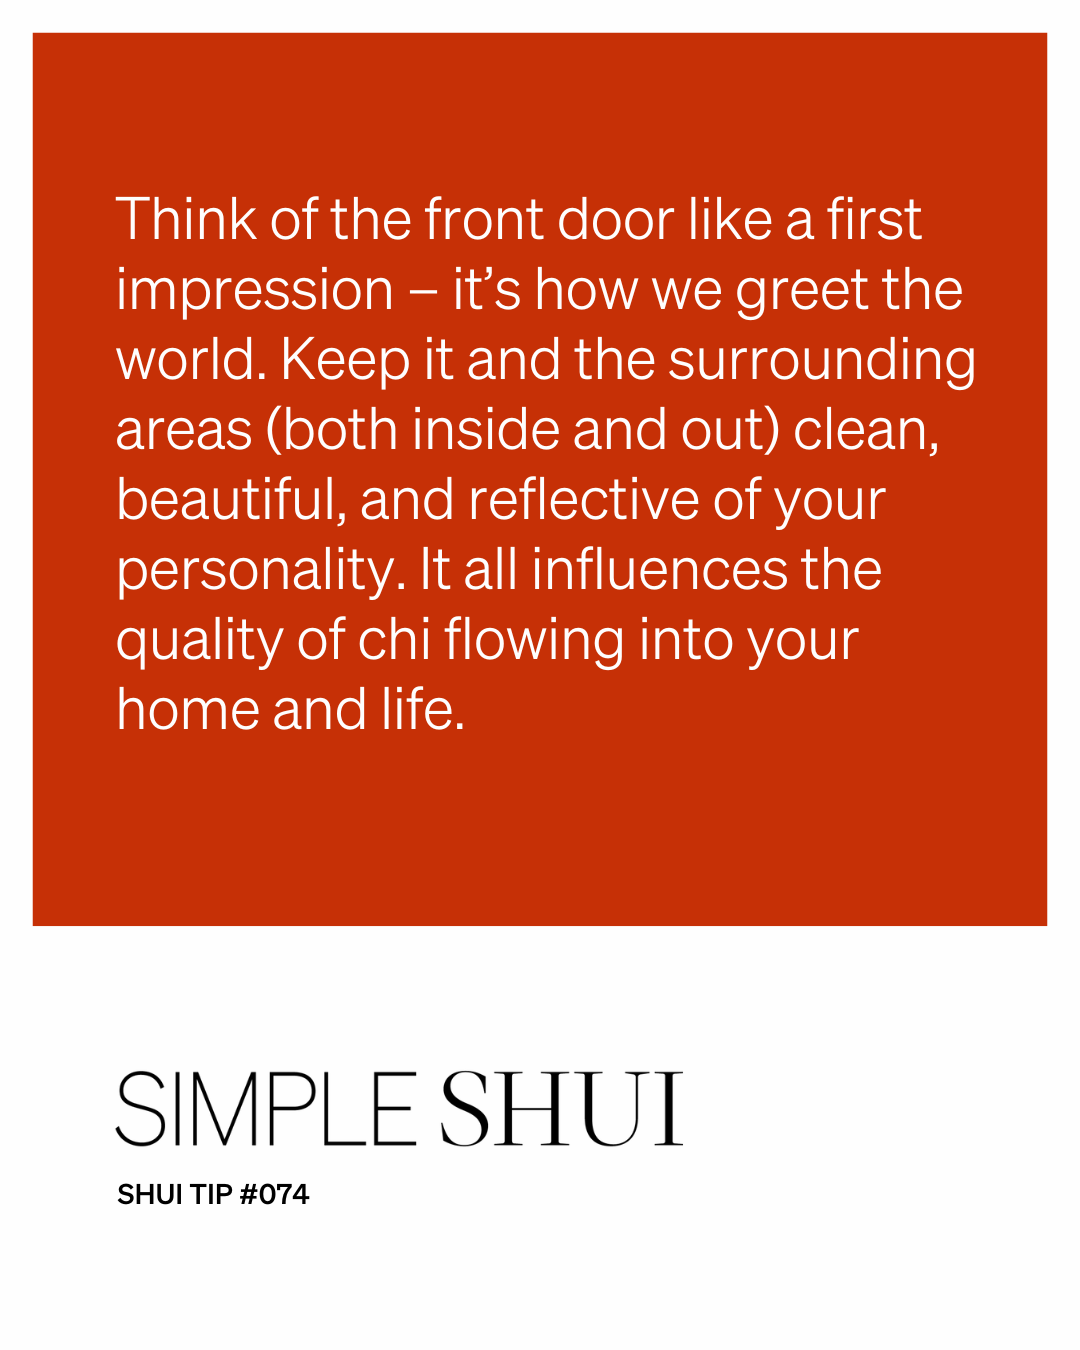 simple shui tip: add color to your front door